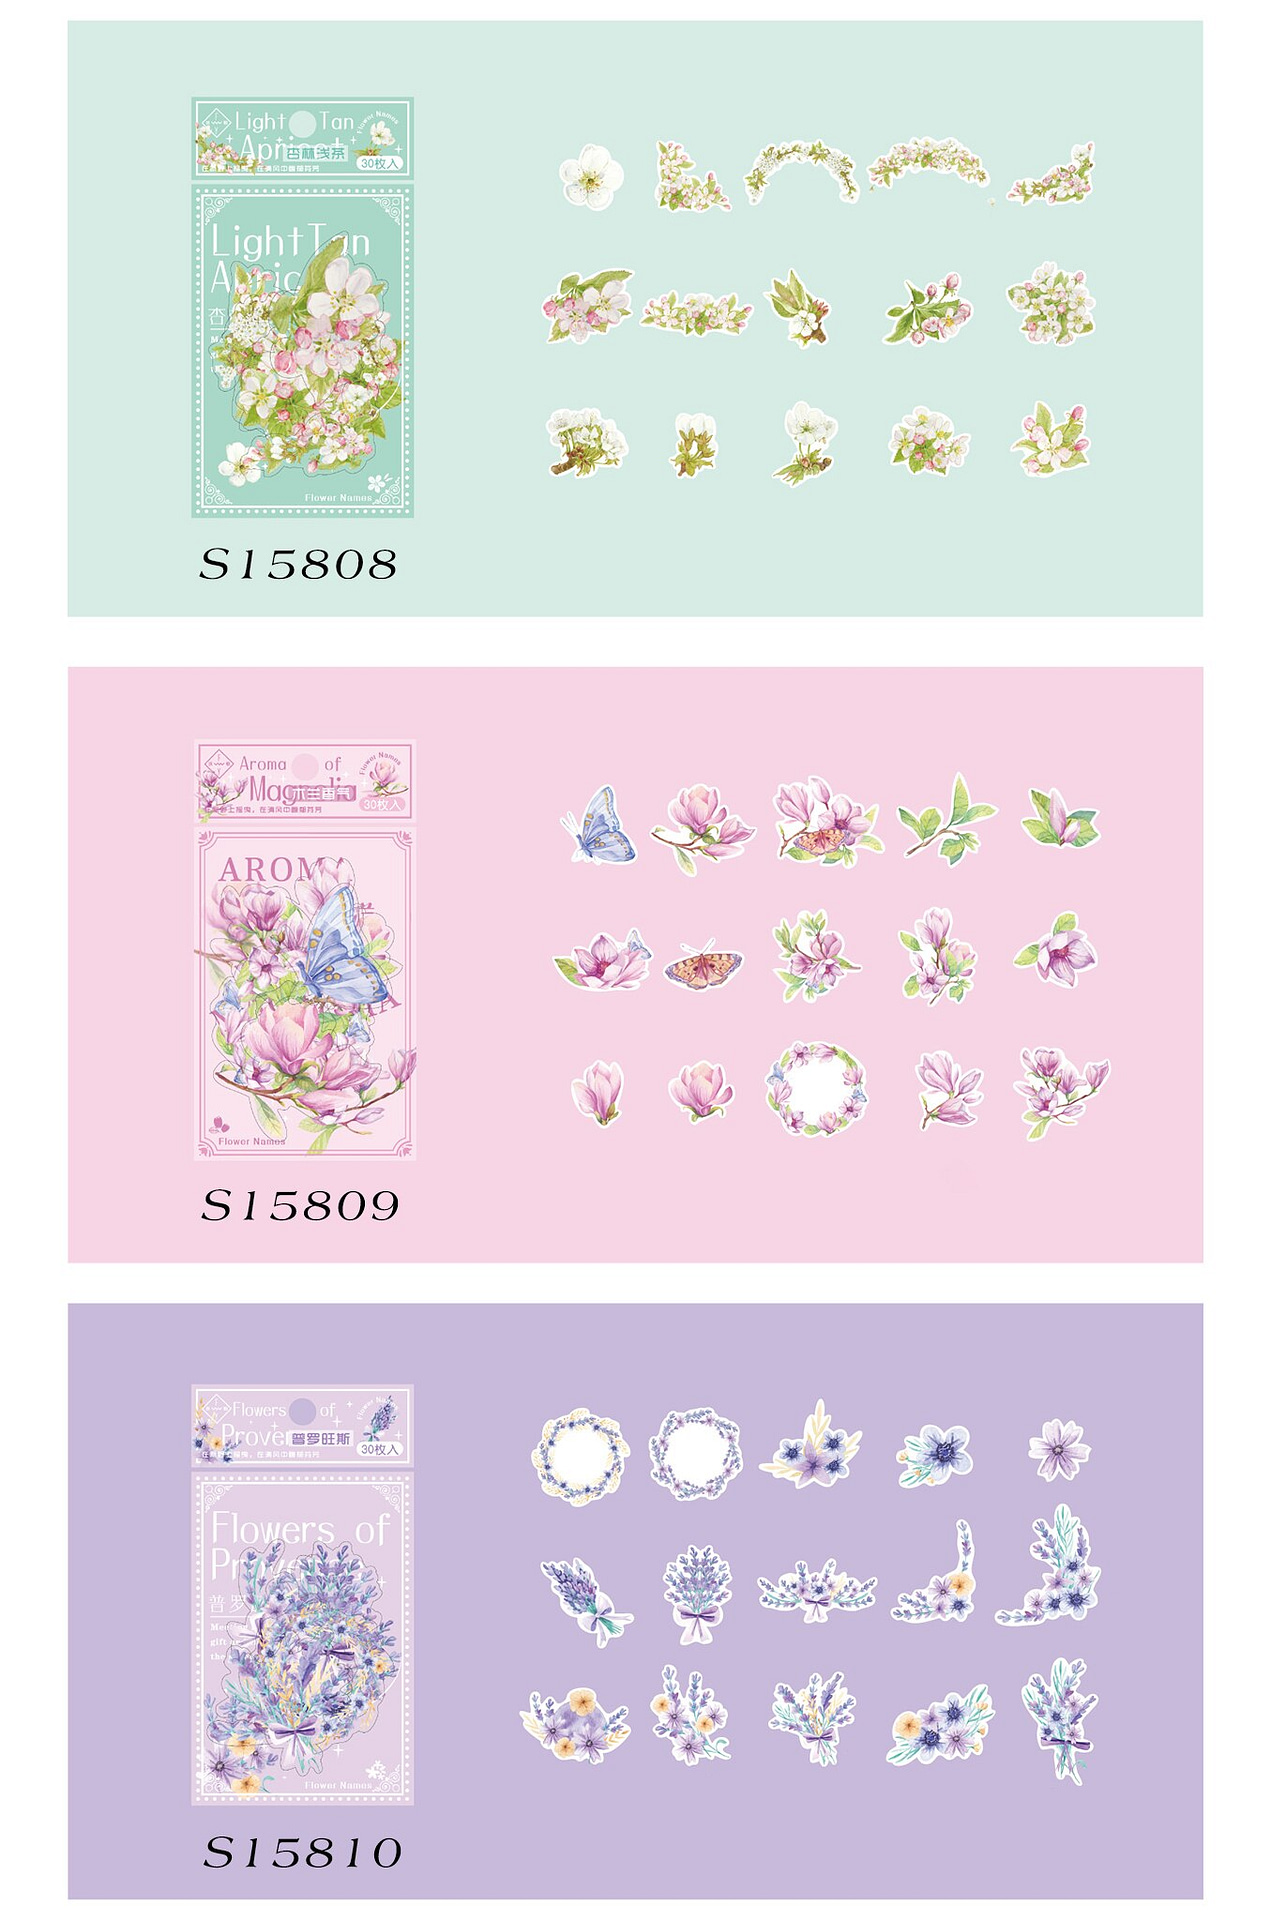 Mr.paper 6 Styles 100Pcs/Bag Vintage Botanical Stickers Aesthetic Flowers Hand Account Material Decorative Stationery Sticker